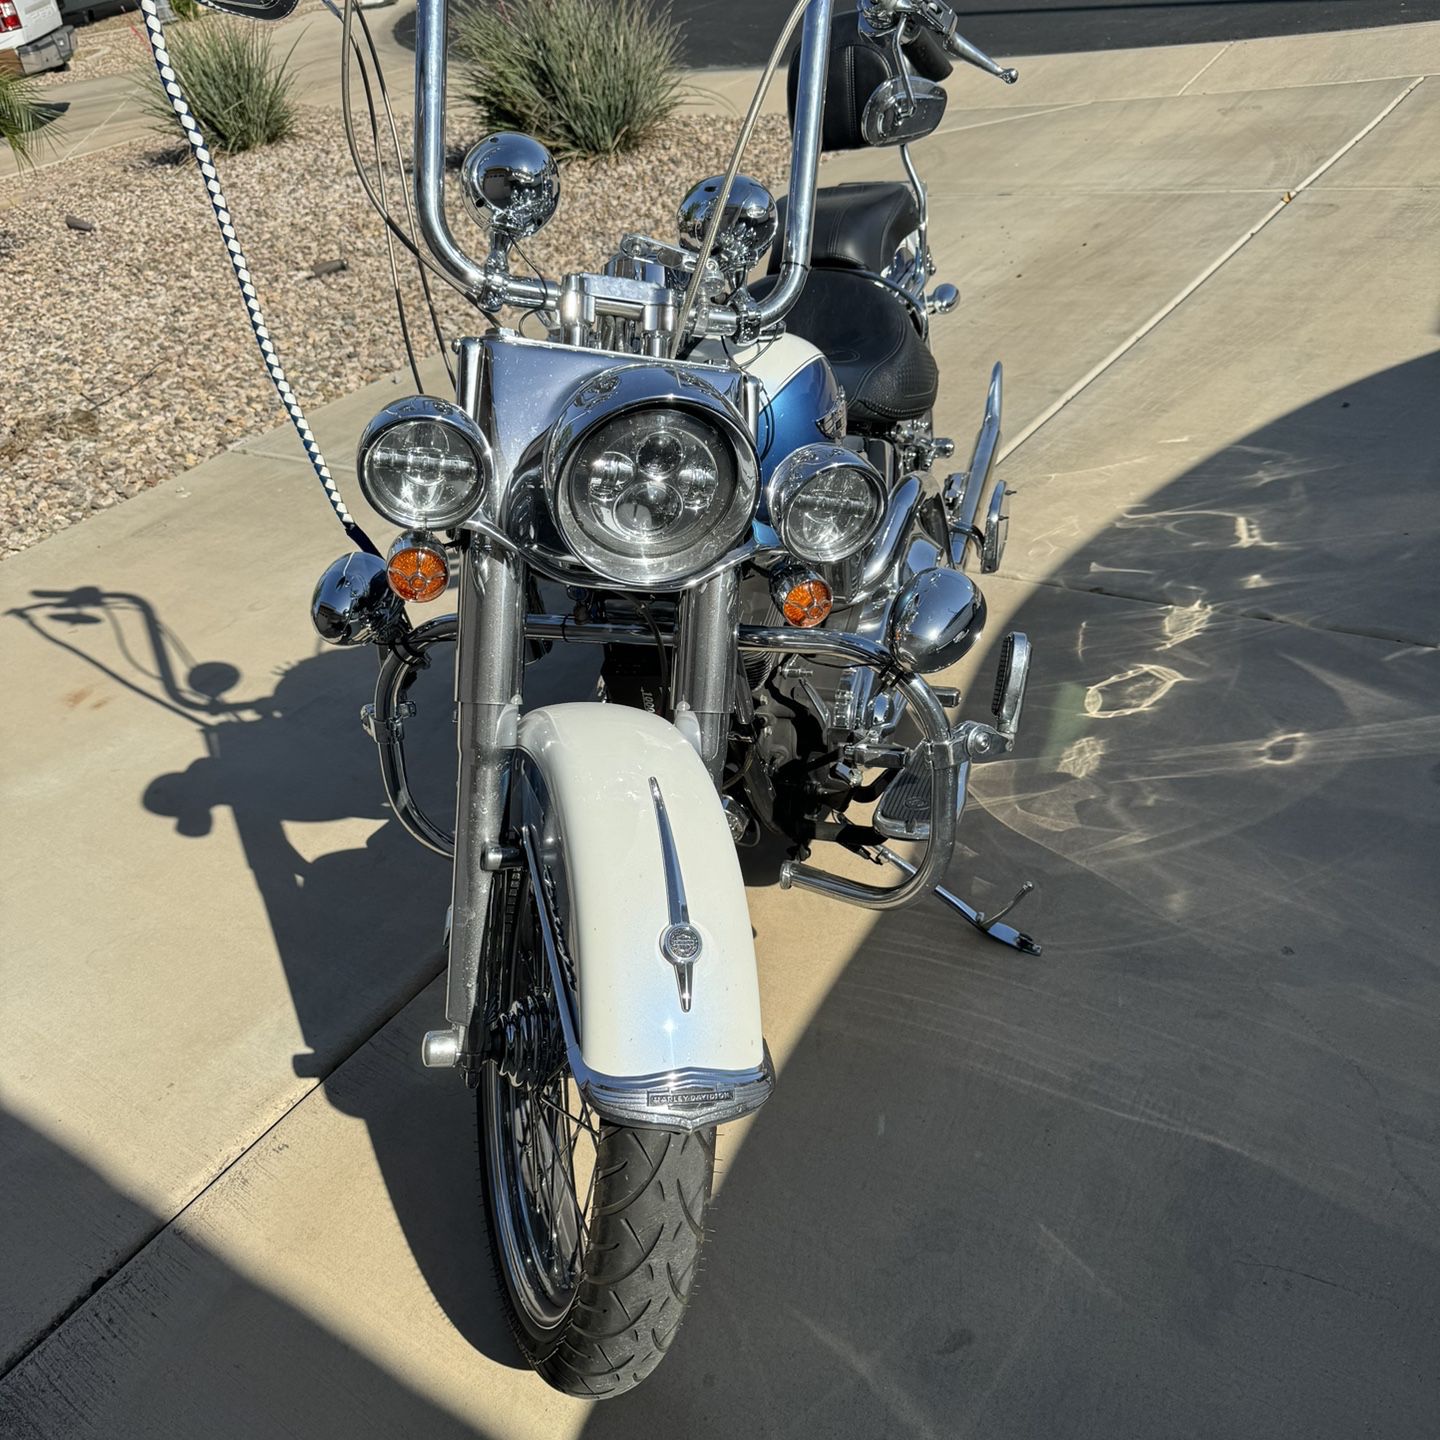 2005 Harley Davidson Soft tail deluxe